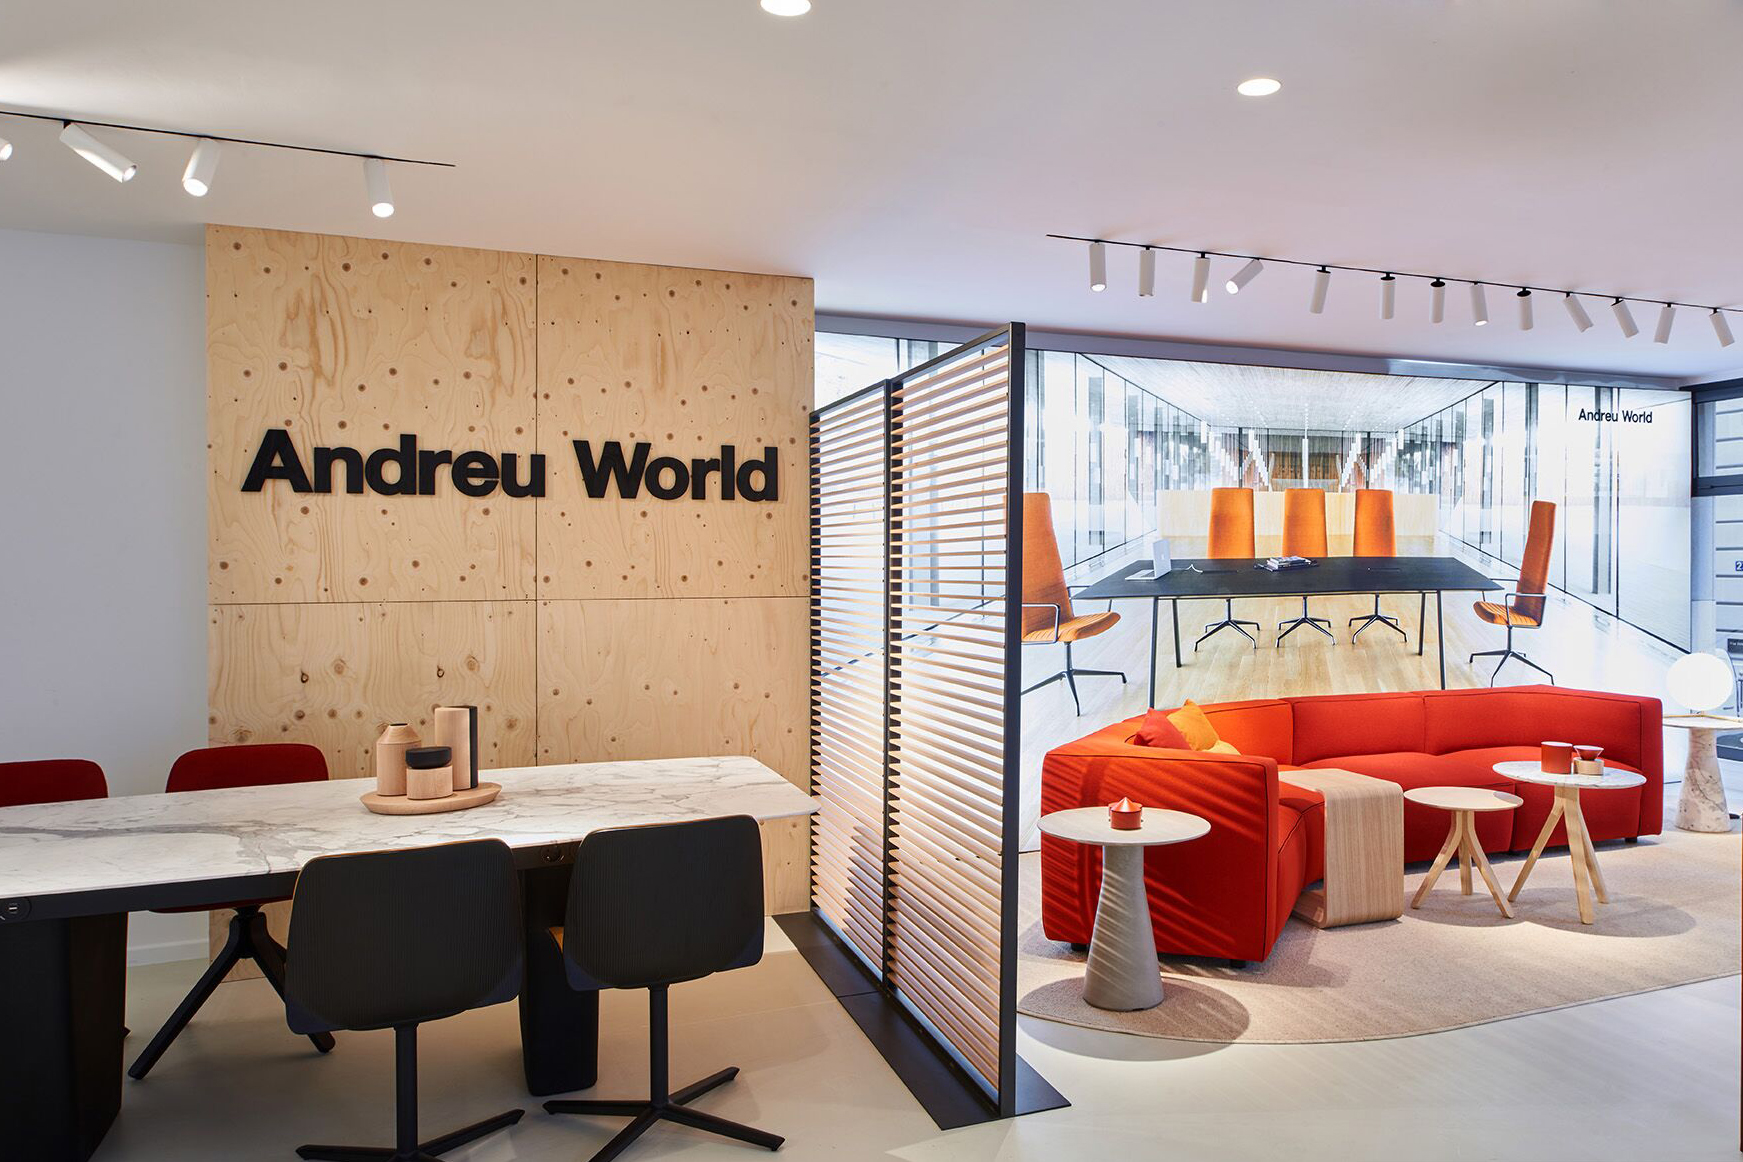 Andreu World´s showroom in Paris (France). Photo by Andreu World